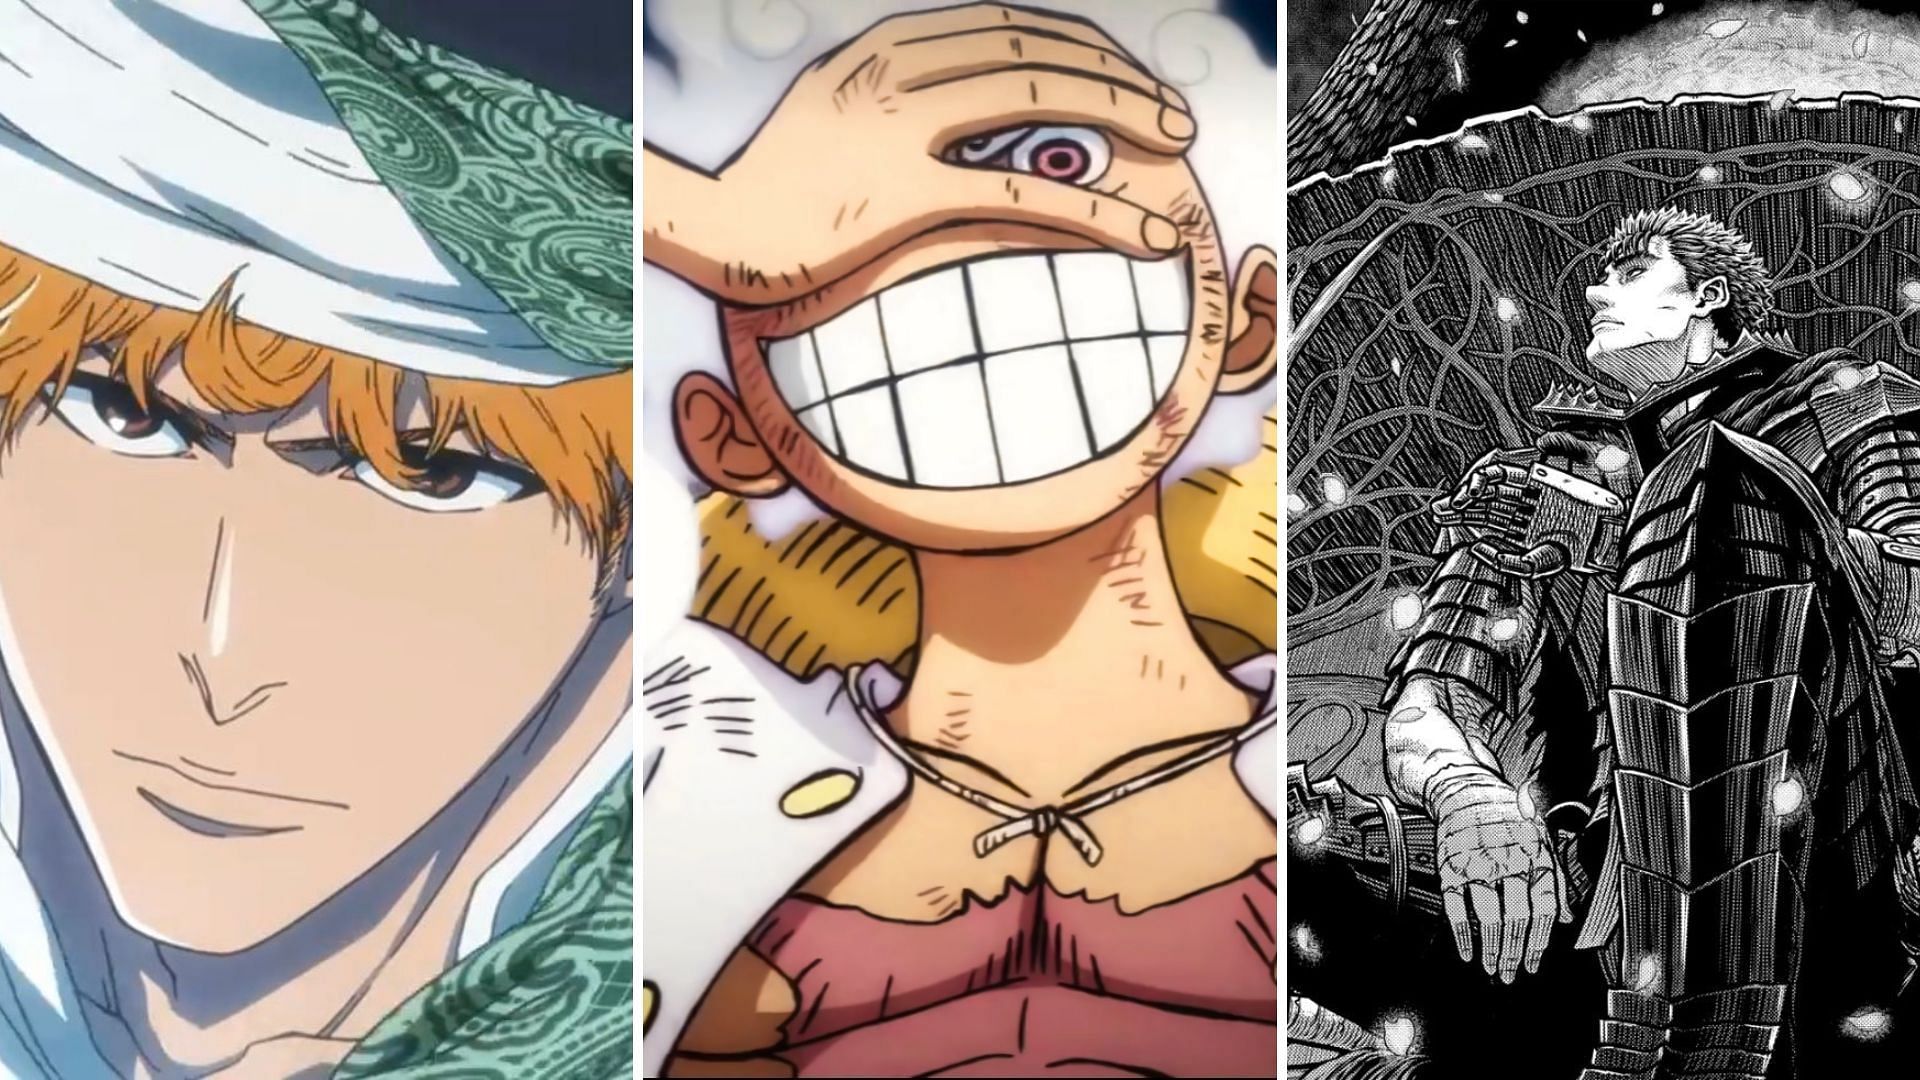 The 10 Most Controversial Male Anime Characters Ranked